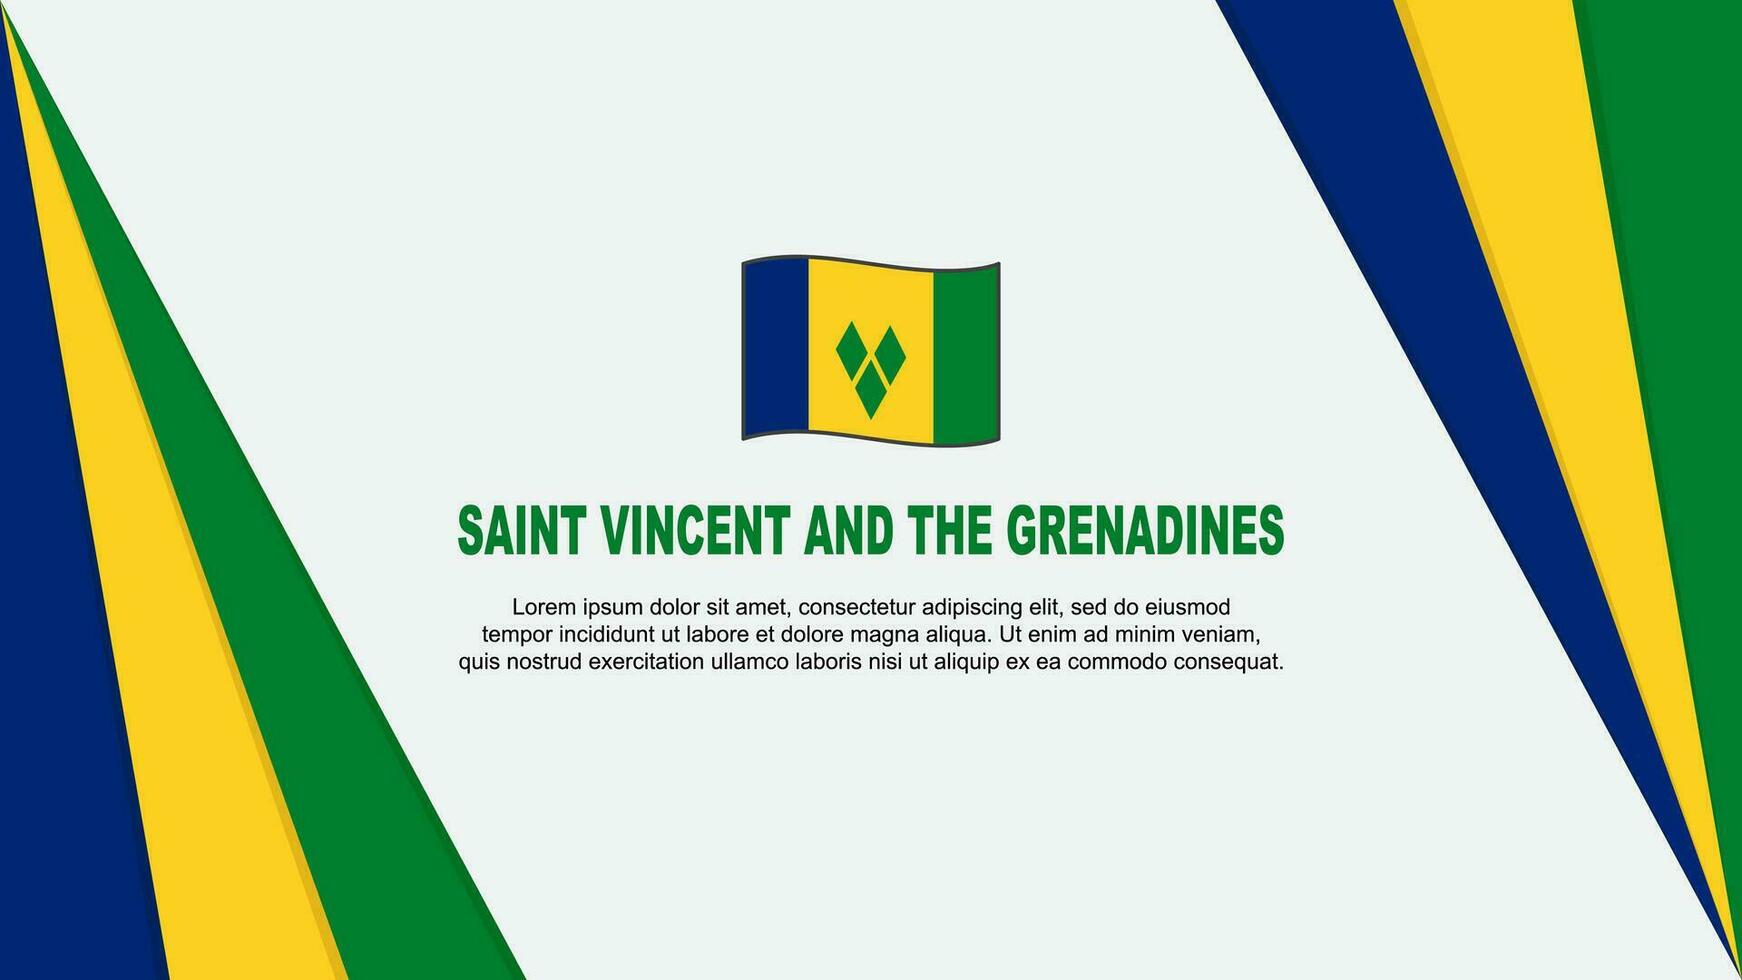 Saint Vincent And The Grenadines Flag Abstract Background Design Template. Saint Vincent And The Grenadines Independence Day Banner Cartoon Vector Illustration. Flag